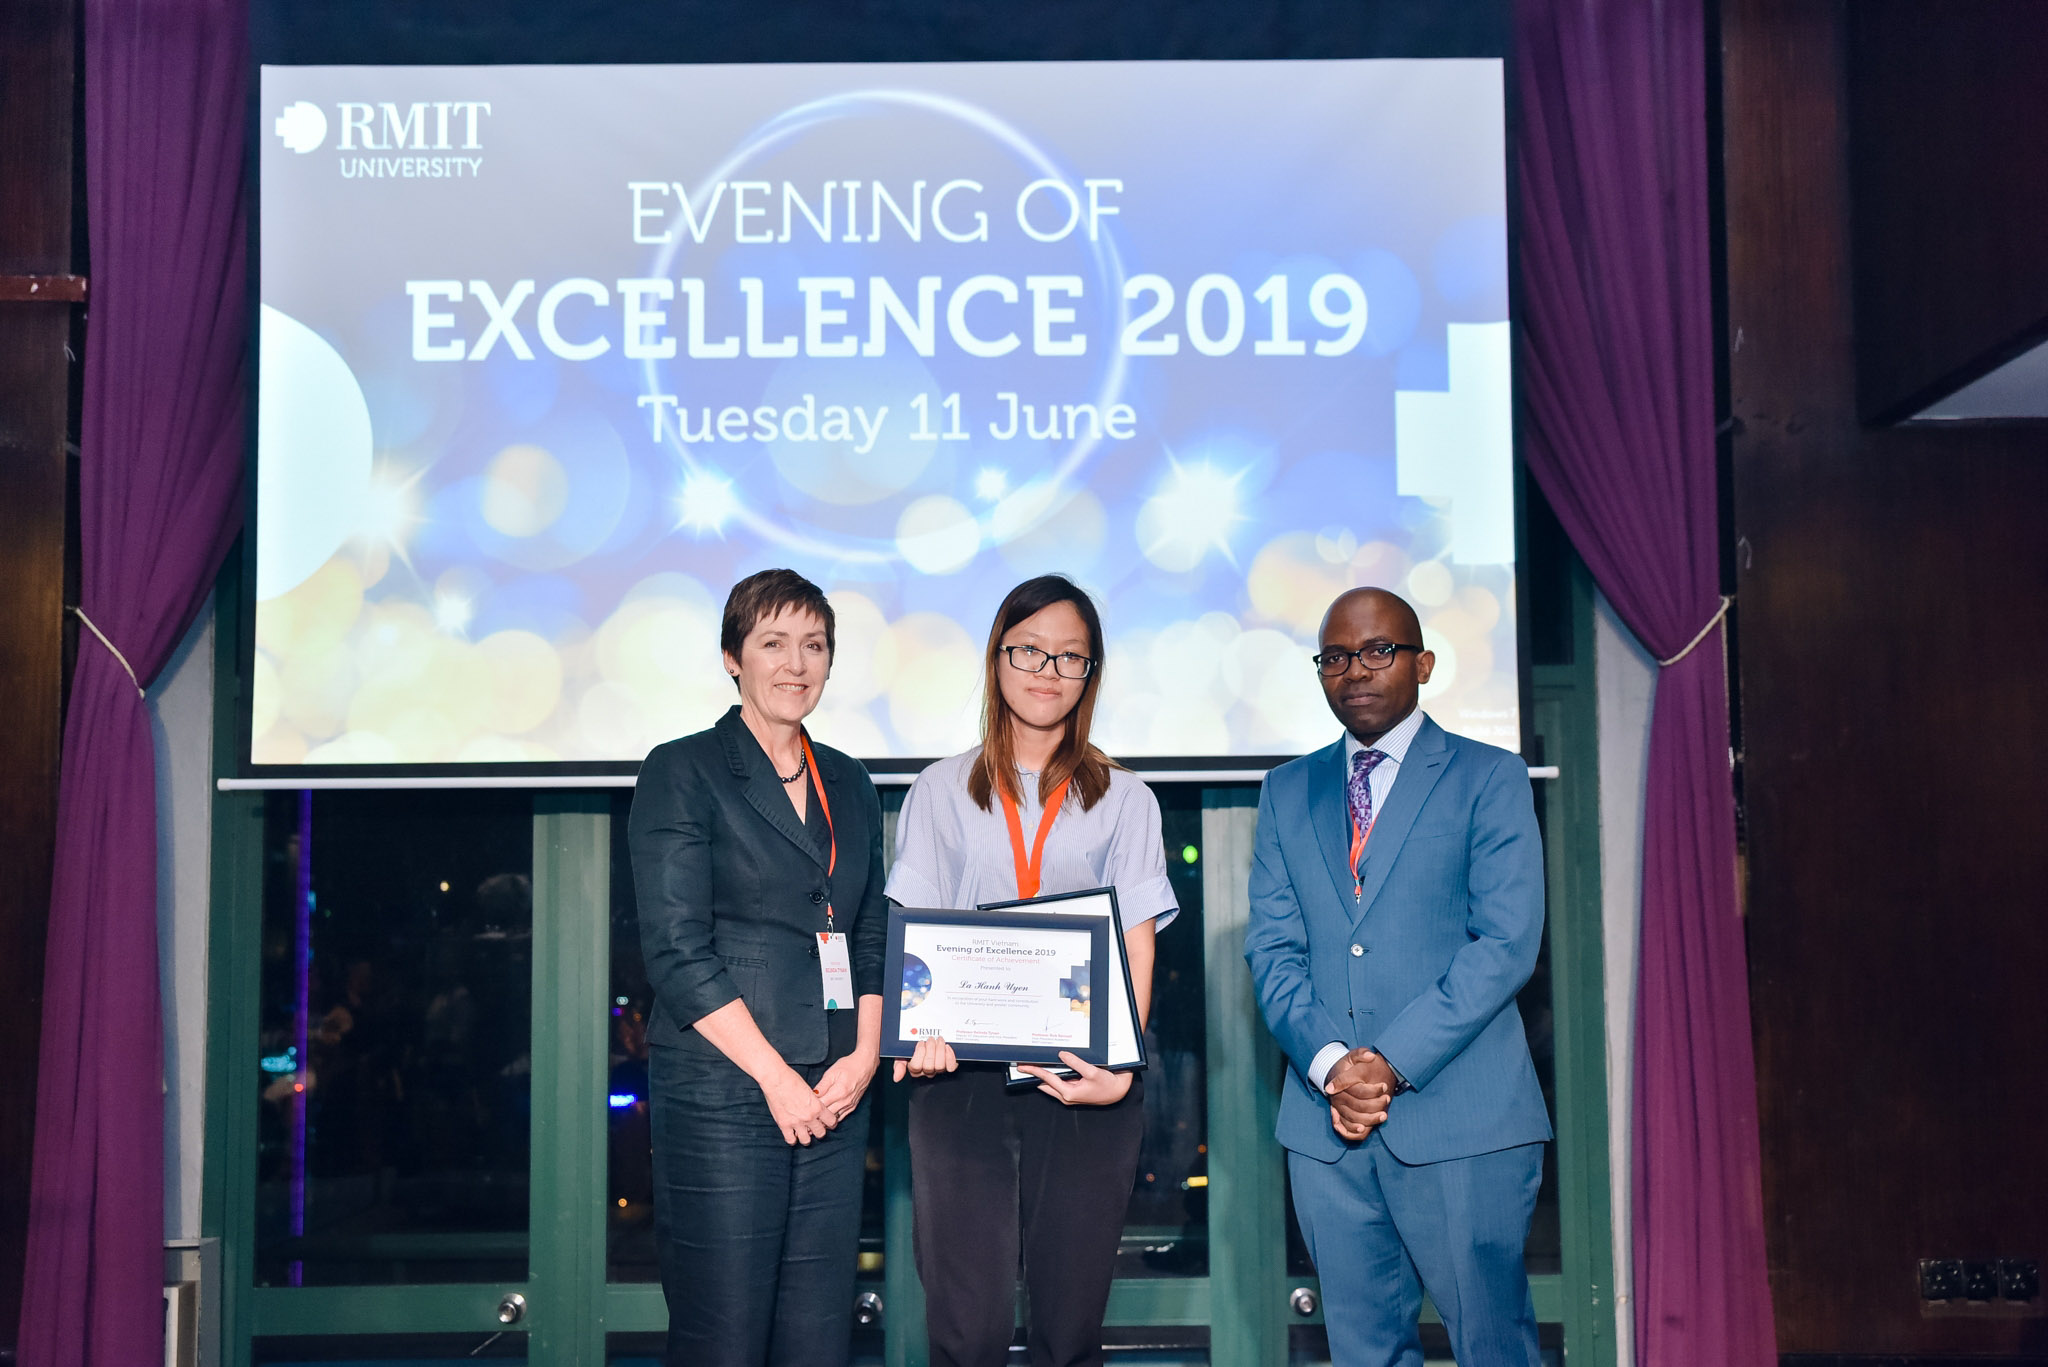 Uyen La (pictured middle) receiving the prestigious Business Medal from RMIT Deputy VC Education and Vice-President Professor Belinda Tynan (pictured left) and Head of School of Business & Management Associate Professor Mathews Nkhoma (pictured right).